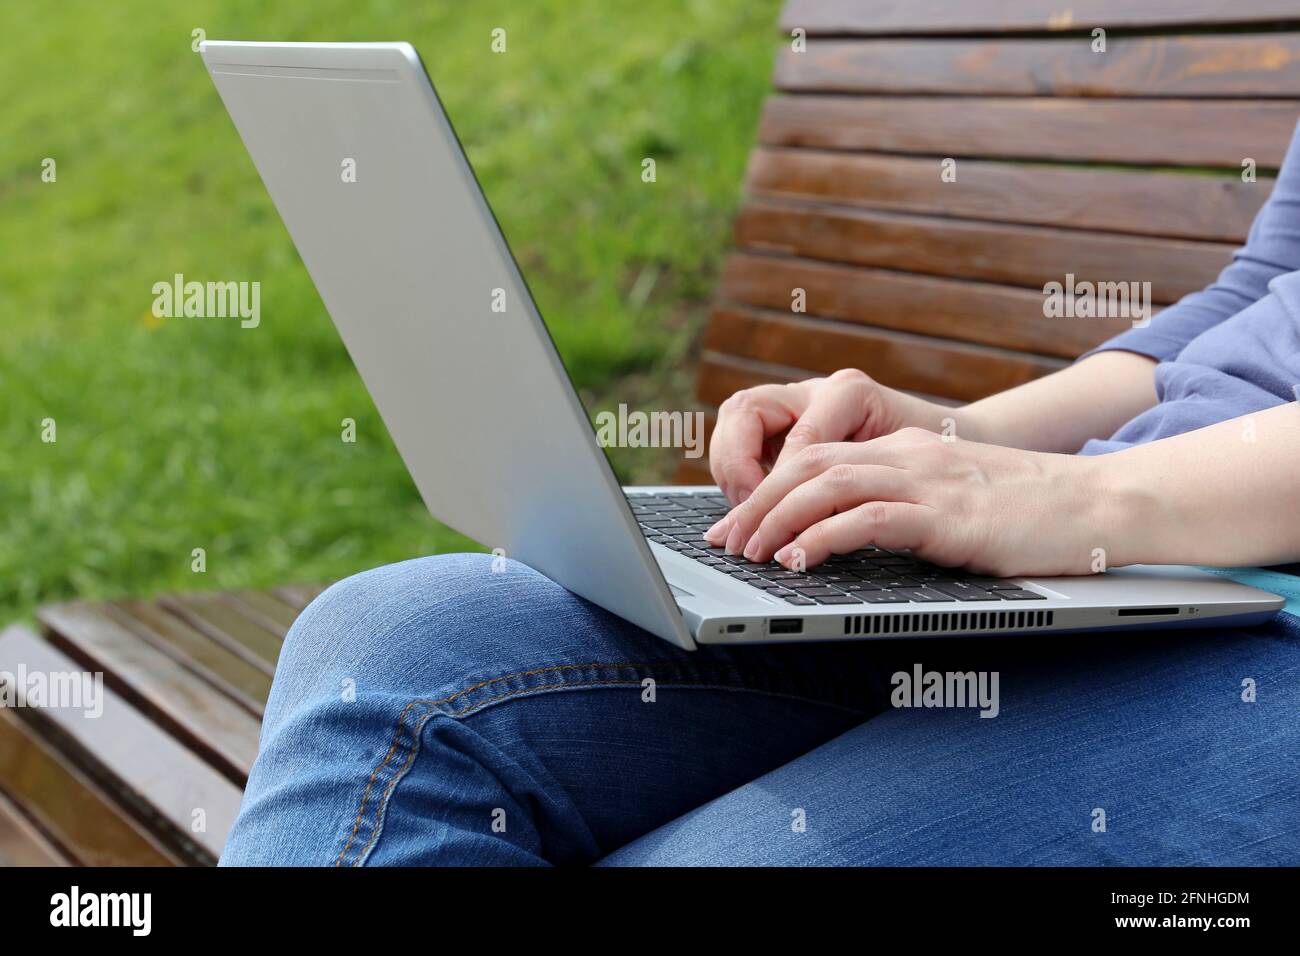 Woman sitting with a laptop on her lap on a wooden bench in park. Female hands on keyboard close up, concept of remote work outdoors, freelancer Stock Photo